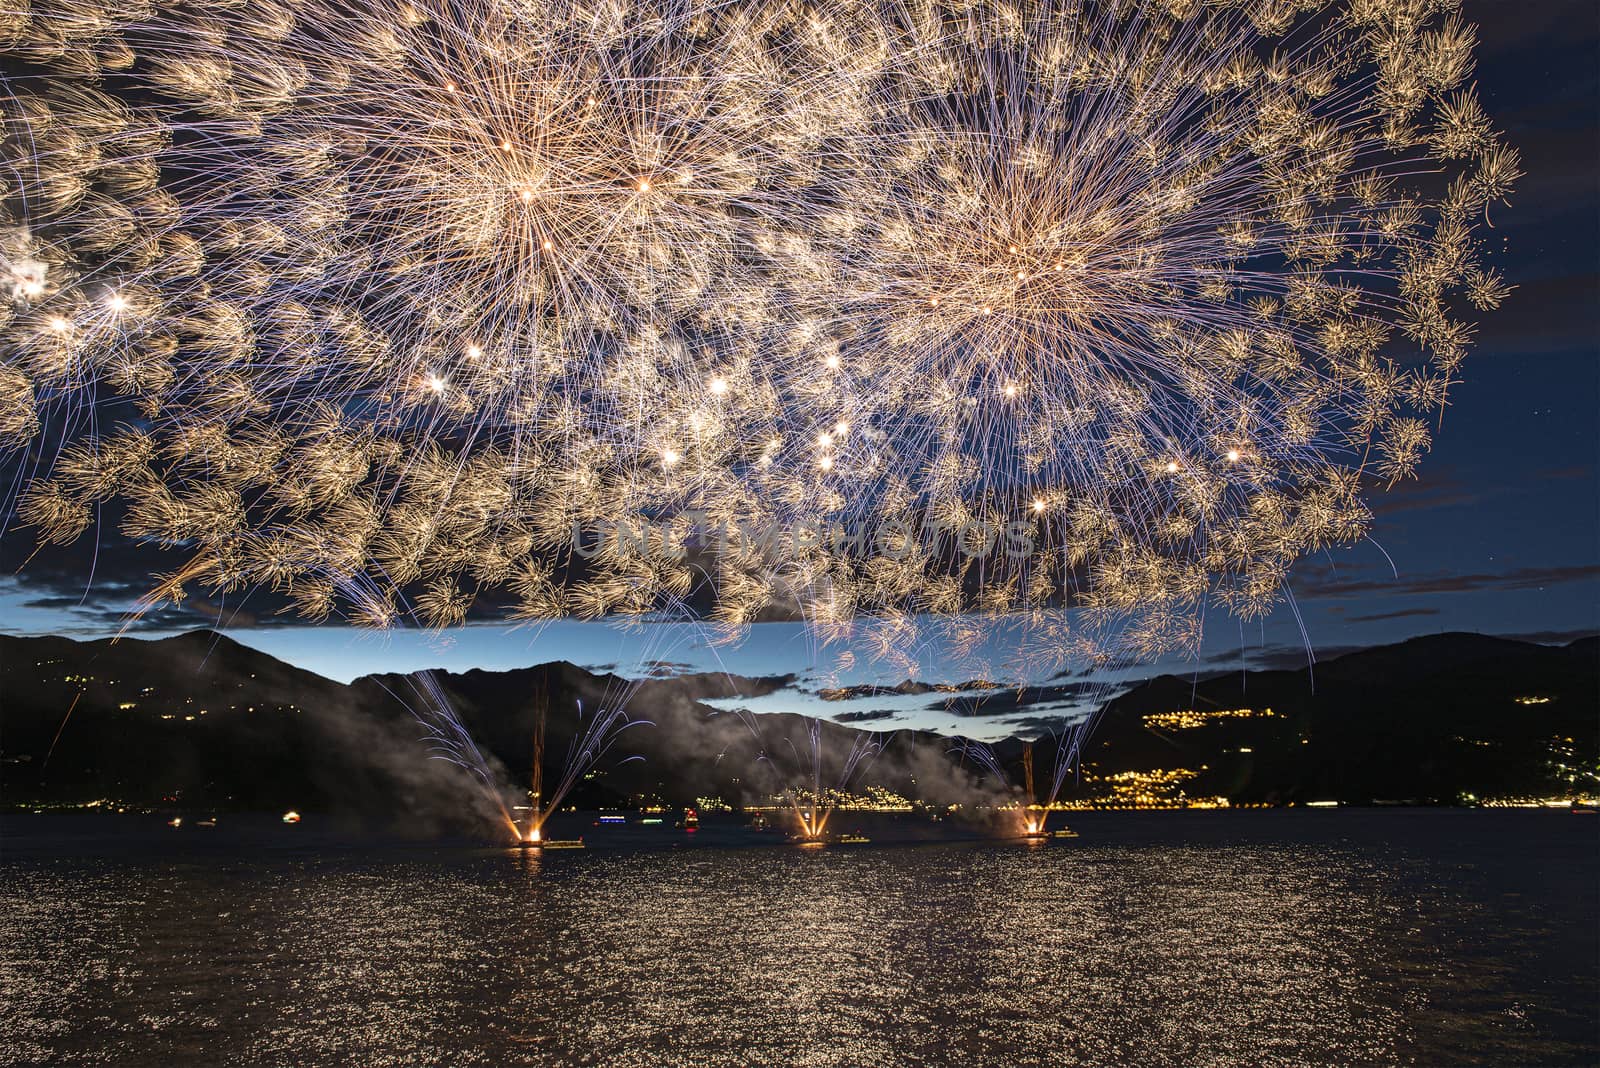 Fireworks on the Maggiore Lake, Luino by Mdc1970